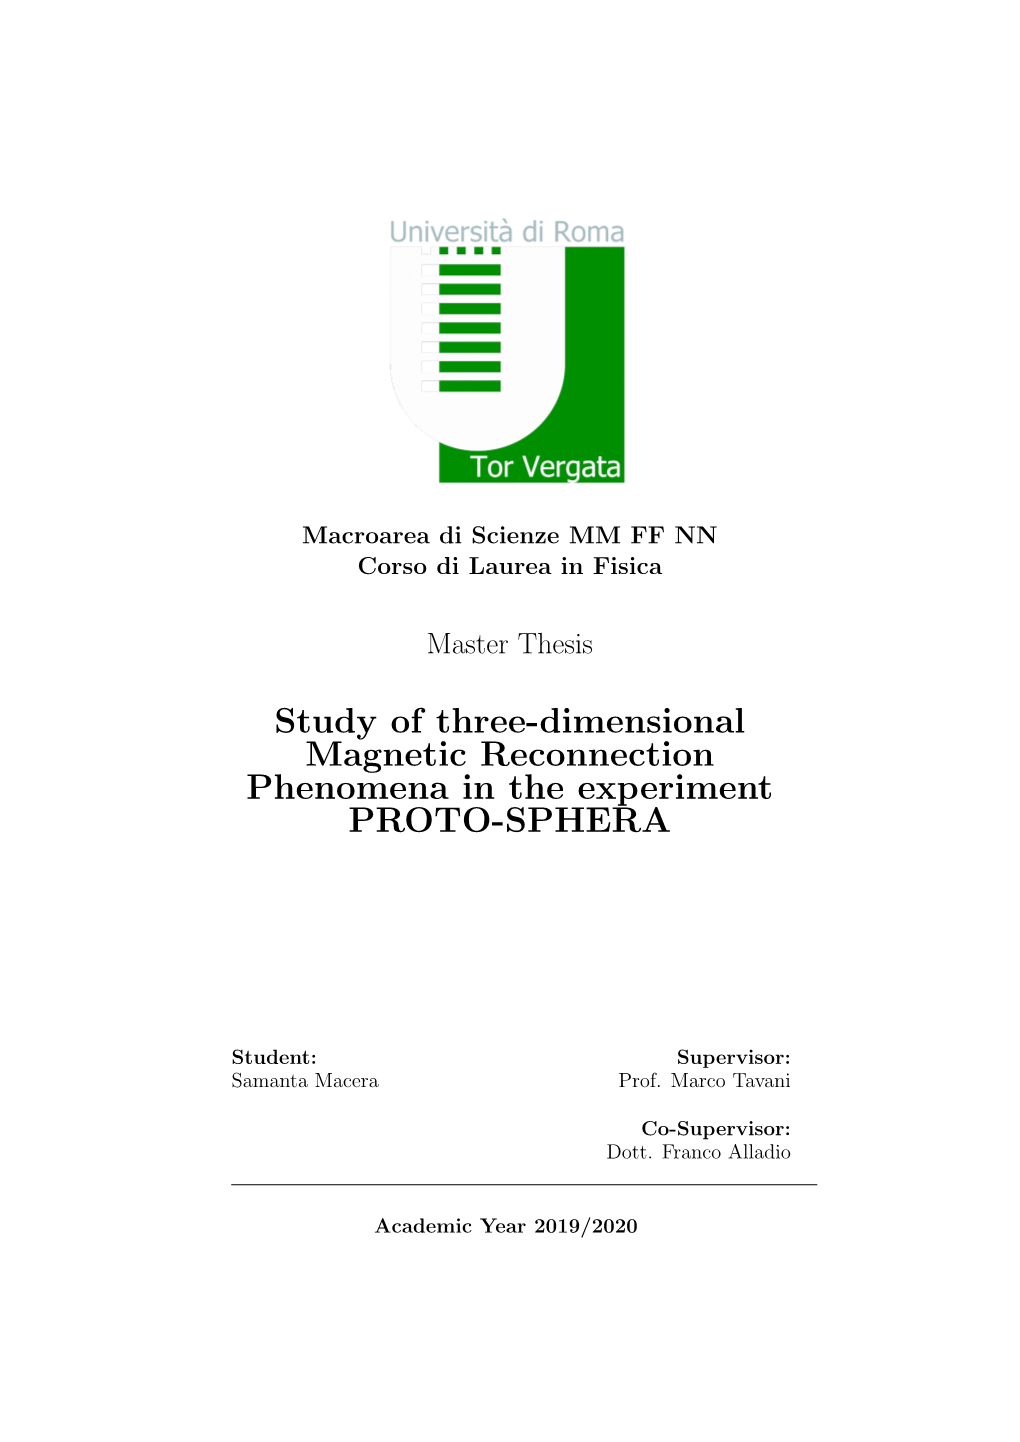 Study of Three-Dimensional Magnetic Reconnection Phenomena in the Experiment PROTO-SPHERA